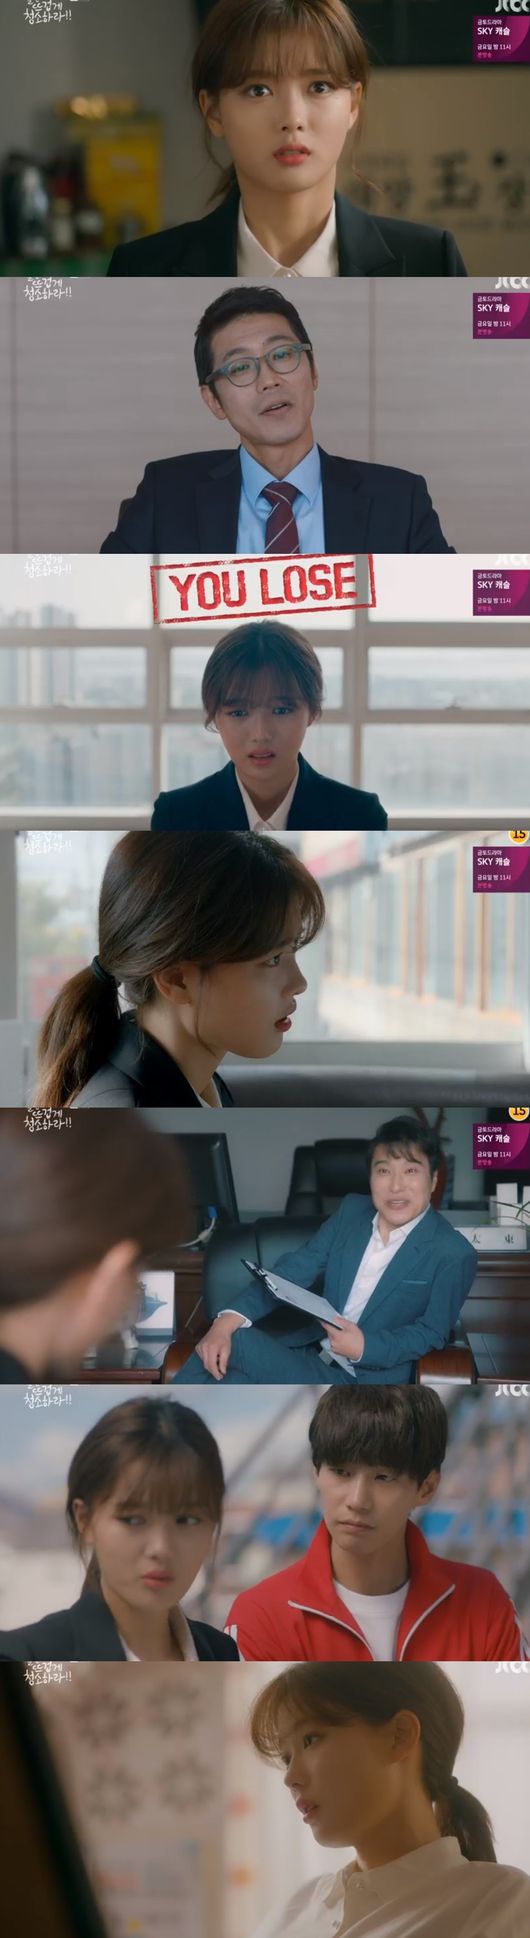 The well has fallen to the Interview.In the JTBC monthly drama Clean Up Once Hot, which aired on the 27th, Gil Osol (Kim Yoo-jung)s House started in the morning.Jang Sun-gyeol (Yoon Gyun-sang), president of The Fairy of Cleaning, checked all over the office, did not allow any dust, hair, and checked the perfect cleaning.Kim O-sol contacted Jang Seon-gyeol and asked him to return the box. He said, You should raise your eyes a little.Osol shouted, Why do you touch someone elses things?If the pre-determination did not pay the money, he said he would file a lawsuit. Osol turned coldly, angry that he was paying and human.Osol, a trainee, passed the first round, but was frustrated by the dropout from the Interview, but soon after eating triangular kimbap and ramen, he was able to prepare for employment by strengthening again.Osol went to the Interview but continued to drop out. Osol said, Its very difficult to get a job. Why not do this?Osols brother Gil Odol (Lee Do-hyun) was investigated at a police box after a struggle with The Fairy of Cleaning staff.Police pointed out why they used such a person, saying, Did you hire a family member who has a criminal record and has no family to guarantee identity?Jang Seon-gyeol told Kwon (Yoo Seon) to fire Lee Dong-hyun (Hak Jin) and Hwang Jae-min (Cha In-ha), who were involved in the fight. I fought in front of the customers House, wearing a company uniform.There is no clearer reason for dismissal. Kwon said, The two of them are members of the company since their founding, so please give them another chance.